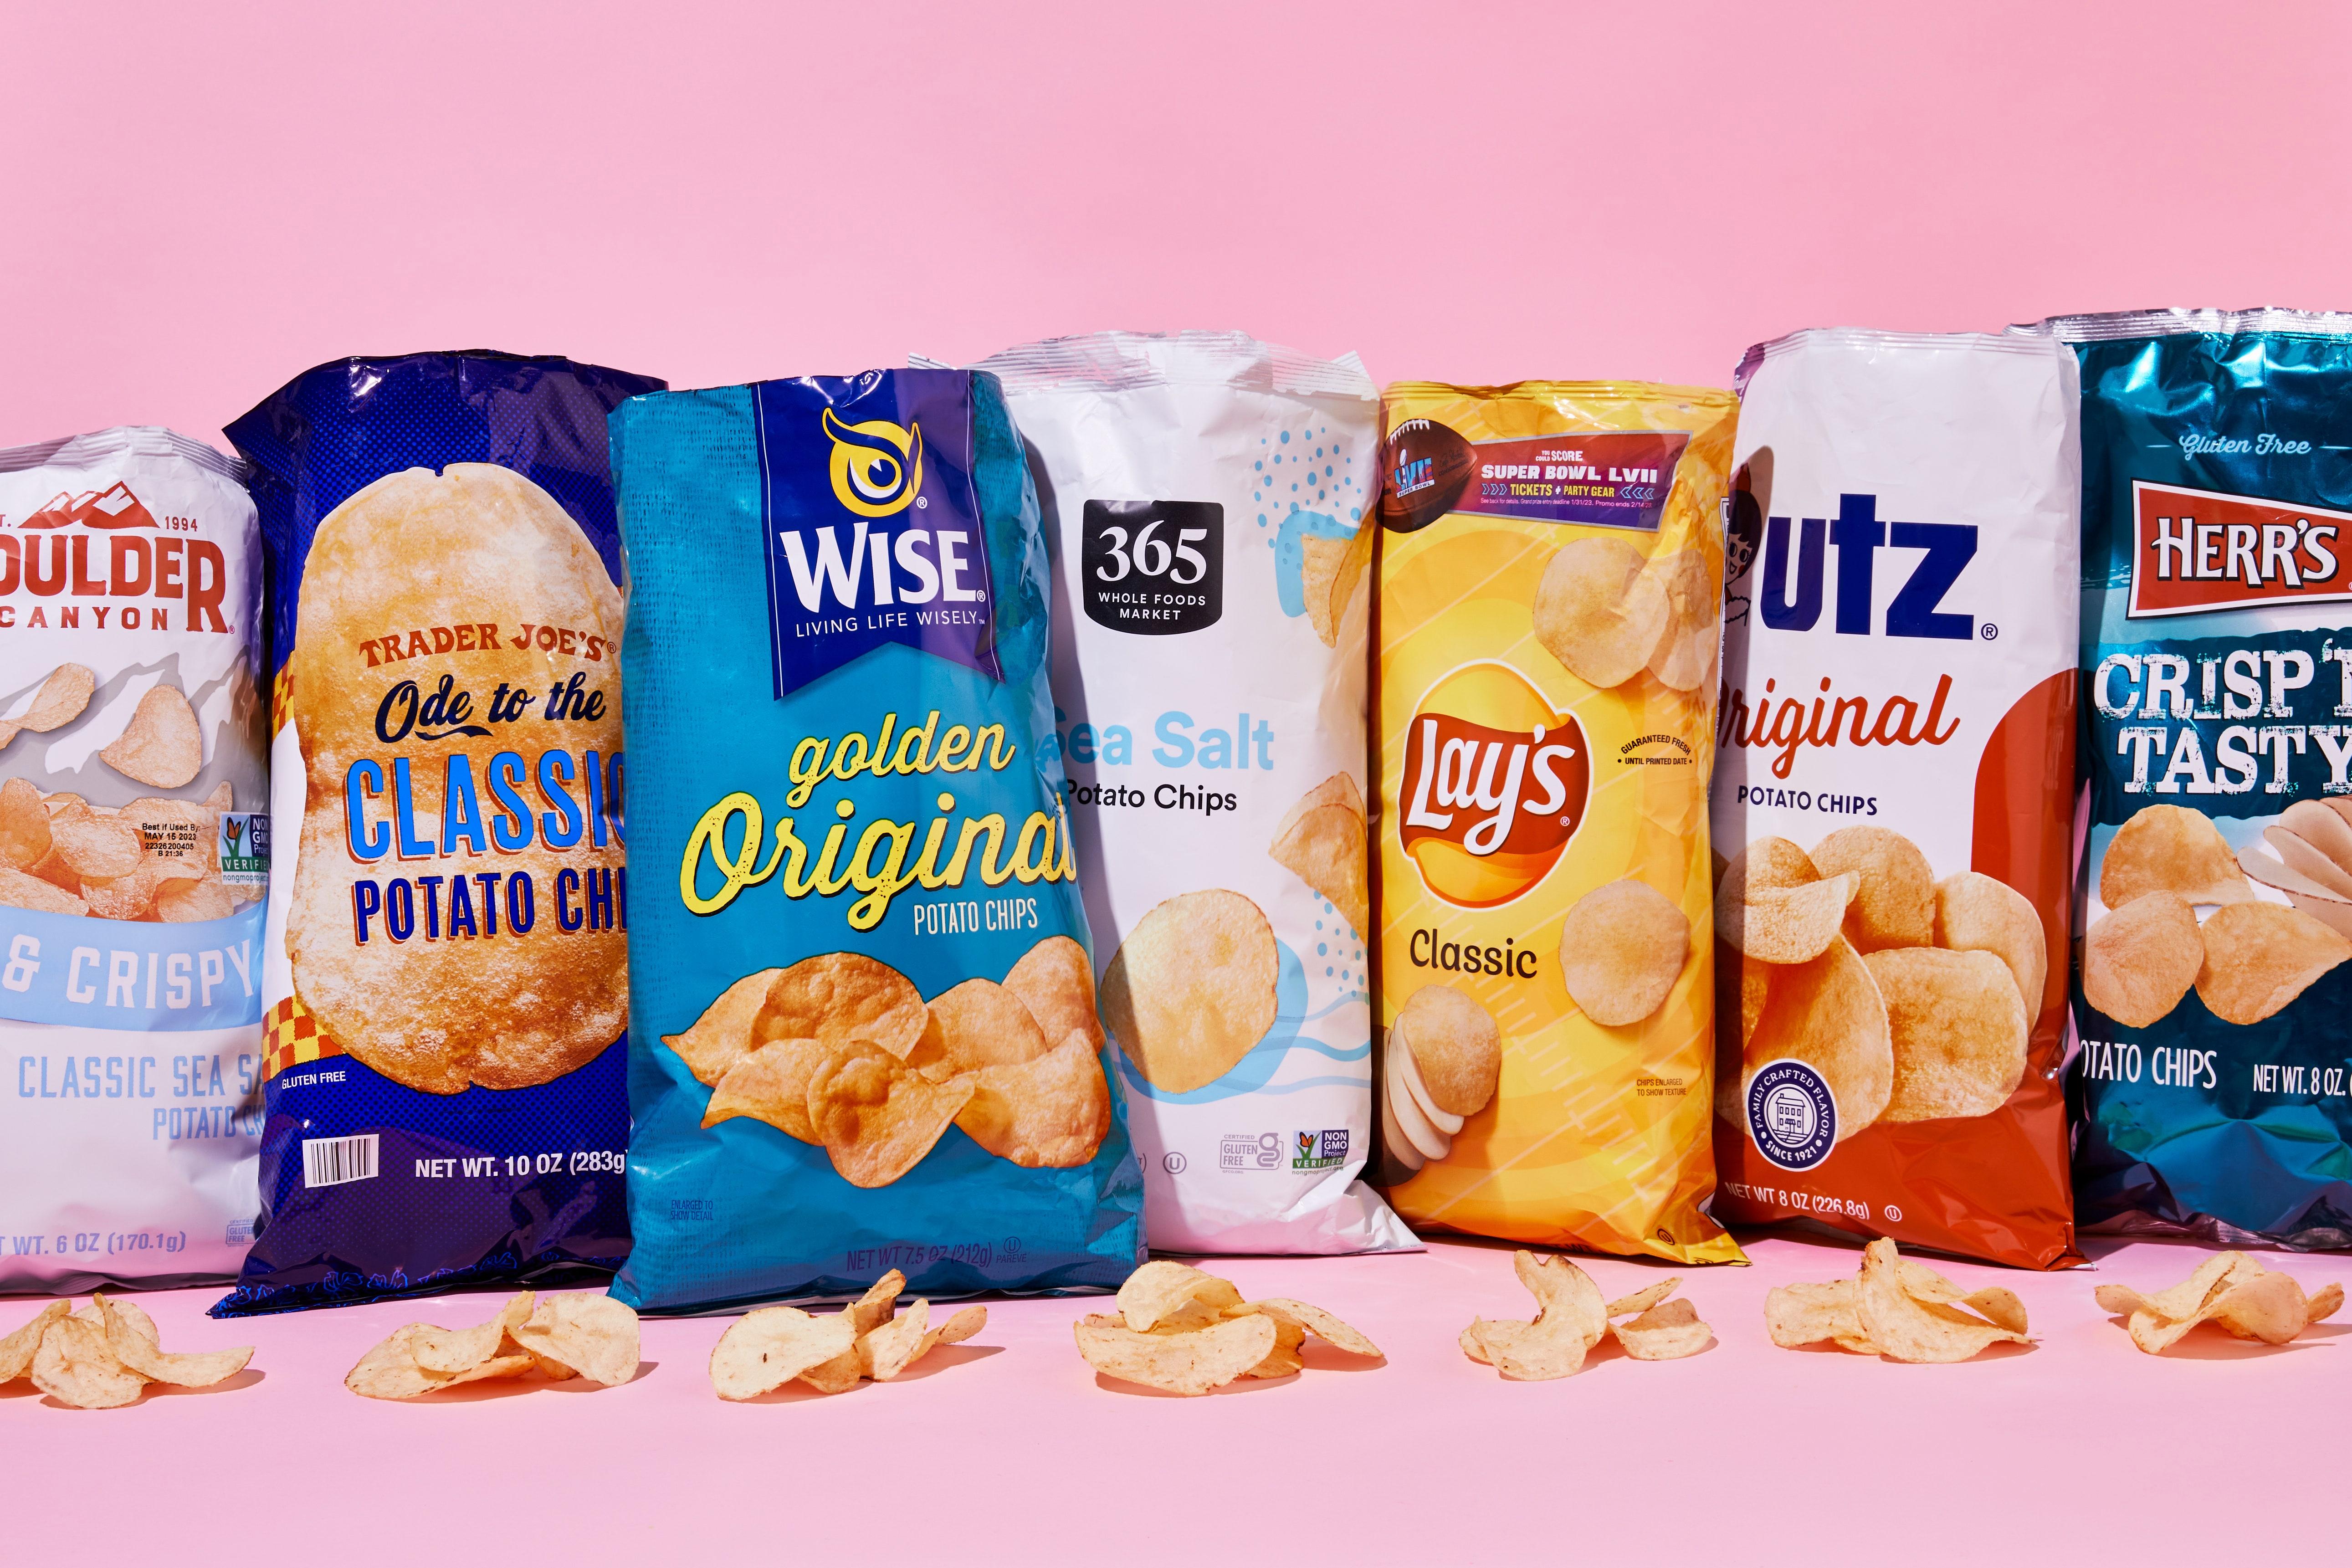 Potato chips in various flavors and brands are displayed against a pink background.